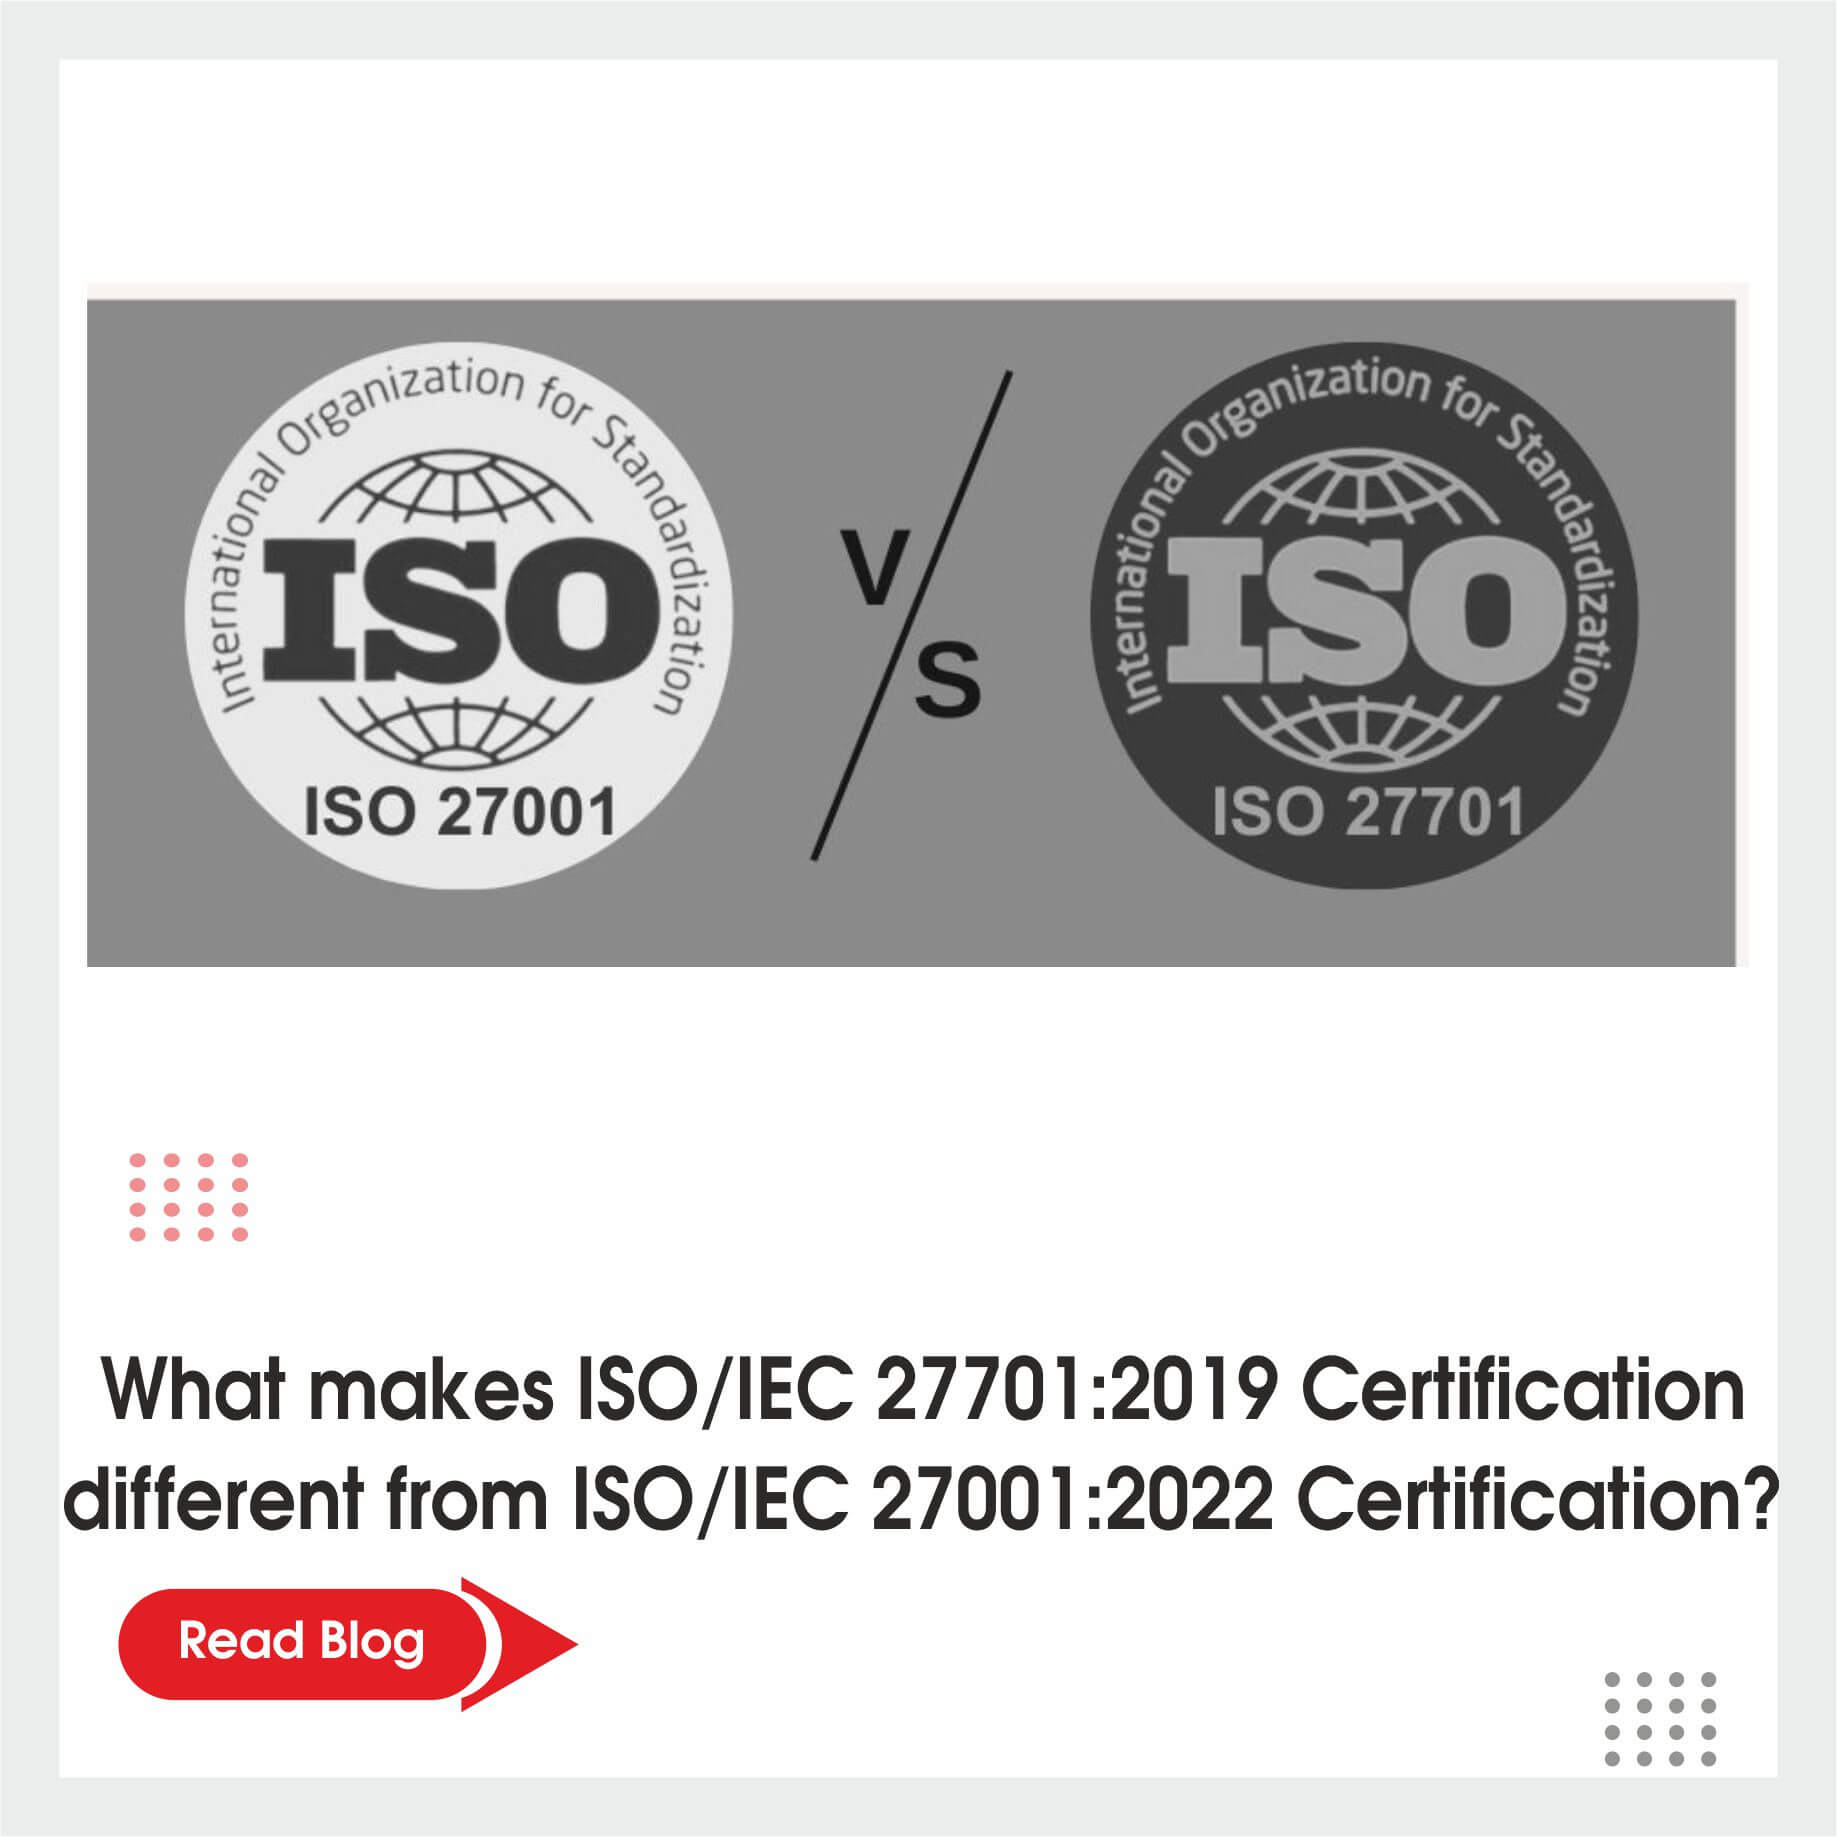 What makes ISO/IEC 27701:2019 Certification different from ISO/IEC 27001:2022 Certification?